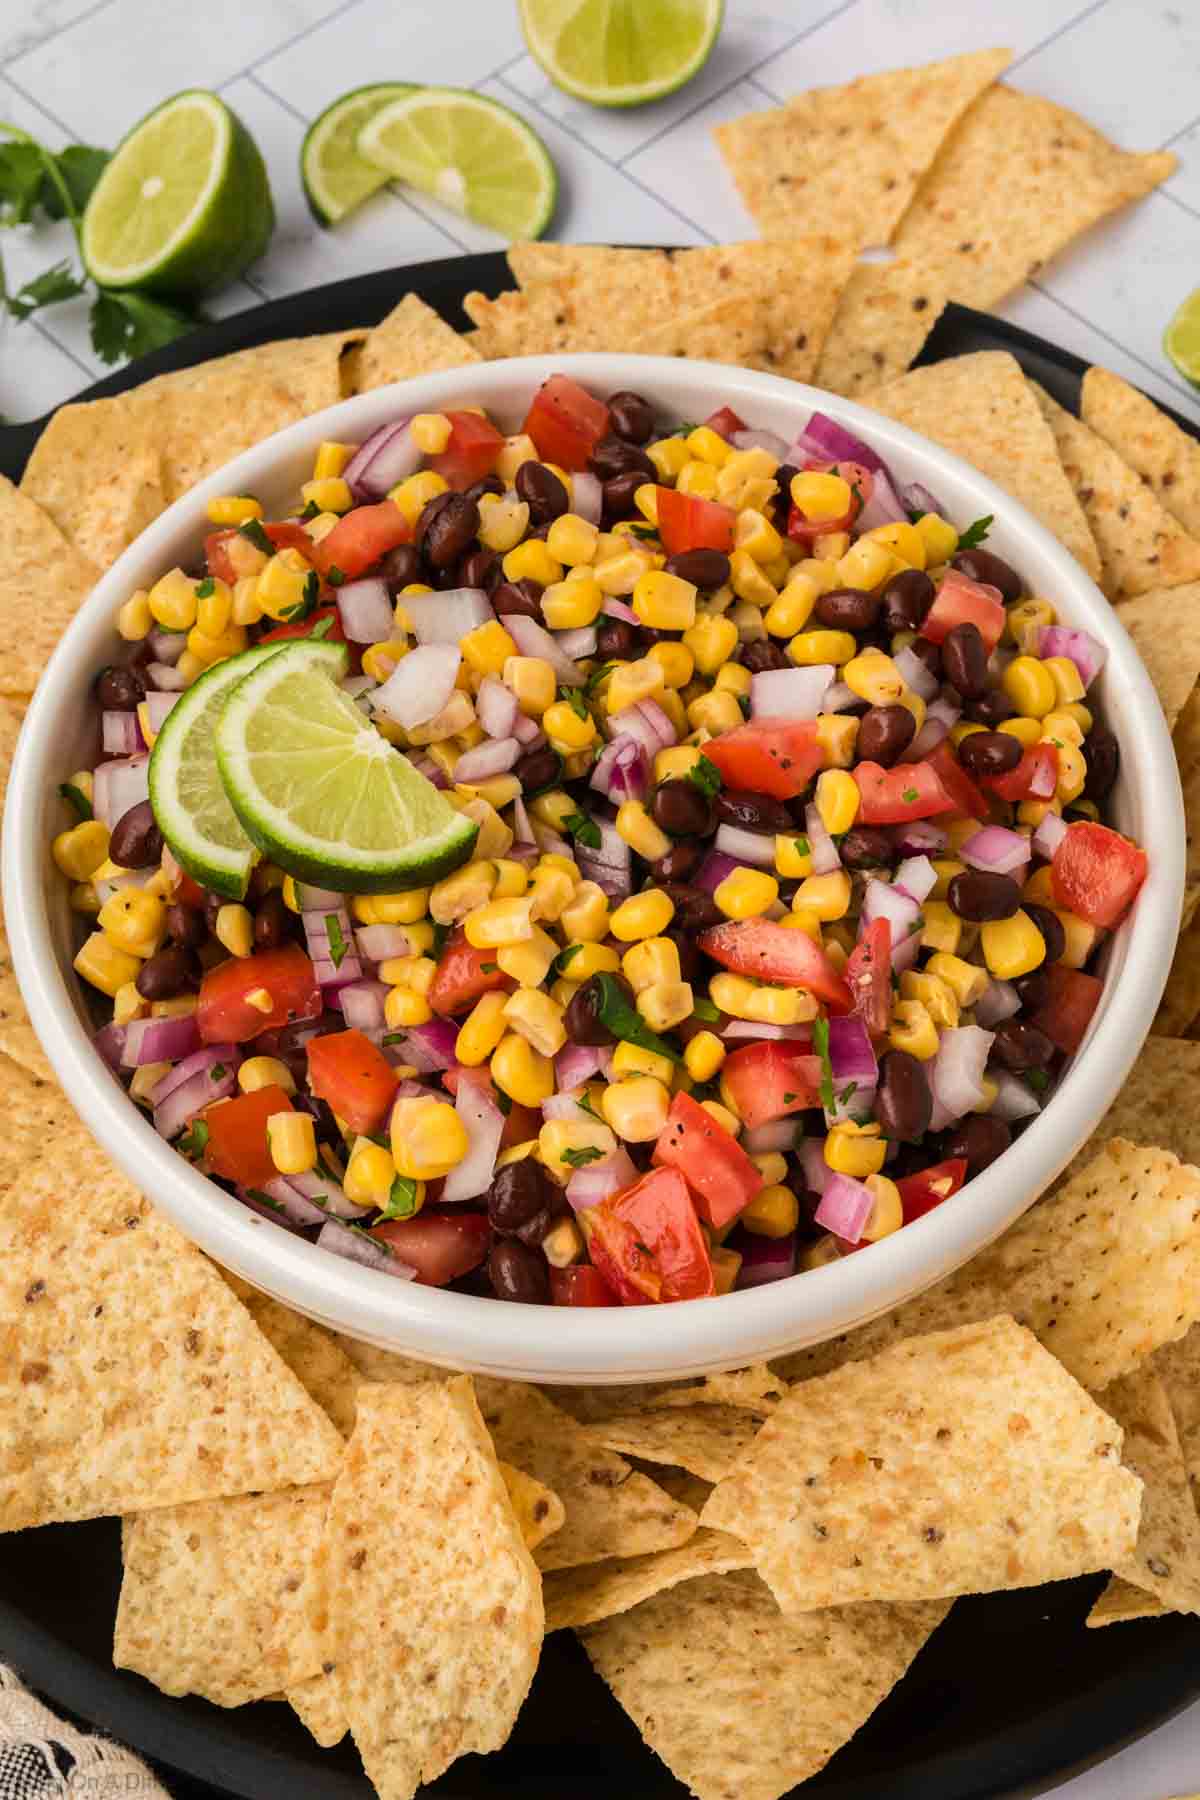 A bowl of colorful black bean salsa with corn, onions, tomatoes, and chopped cilantro, garnished with lime slices. The bowl is surrounded by tortilla chips, with lime halves in the background on a light countertop.